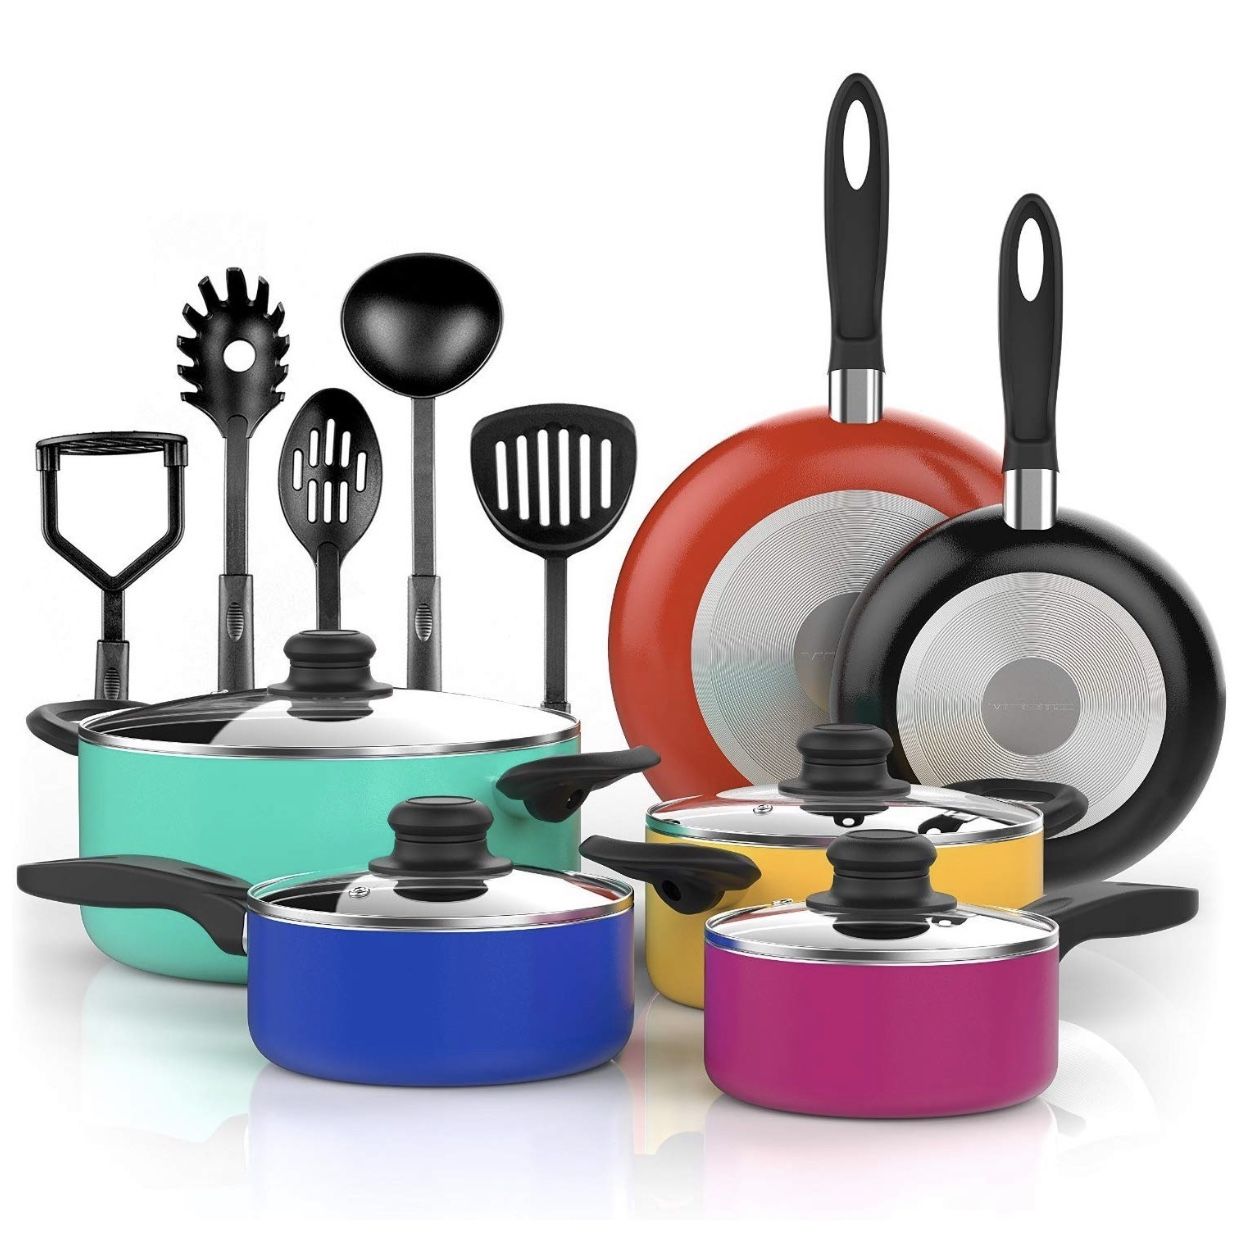 NEW nonstick cooking pots and pans with cooking utensils